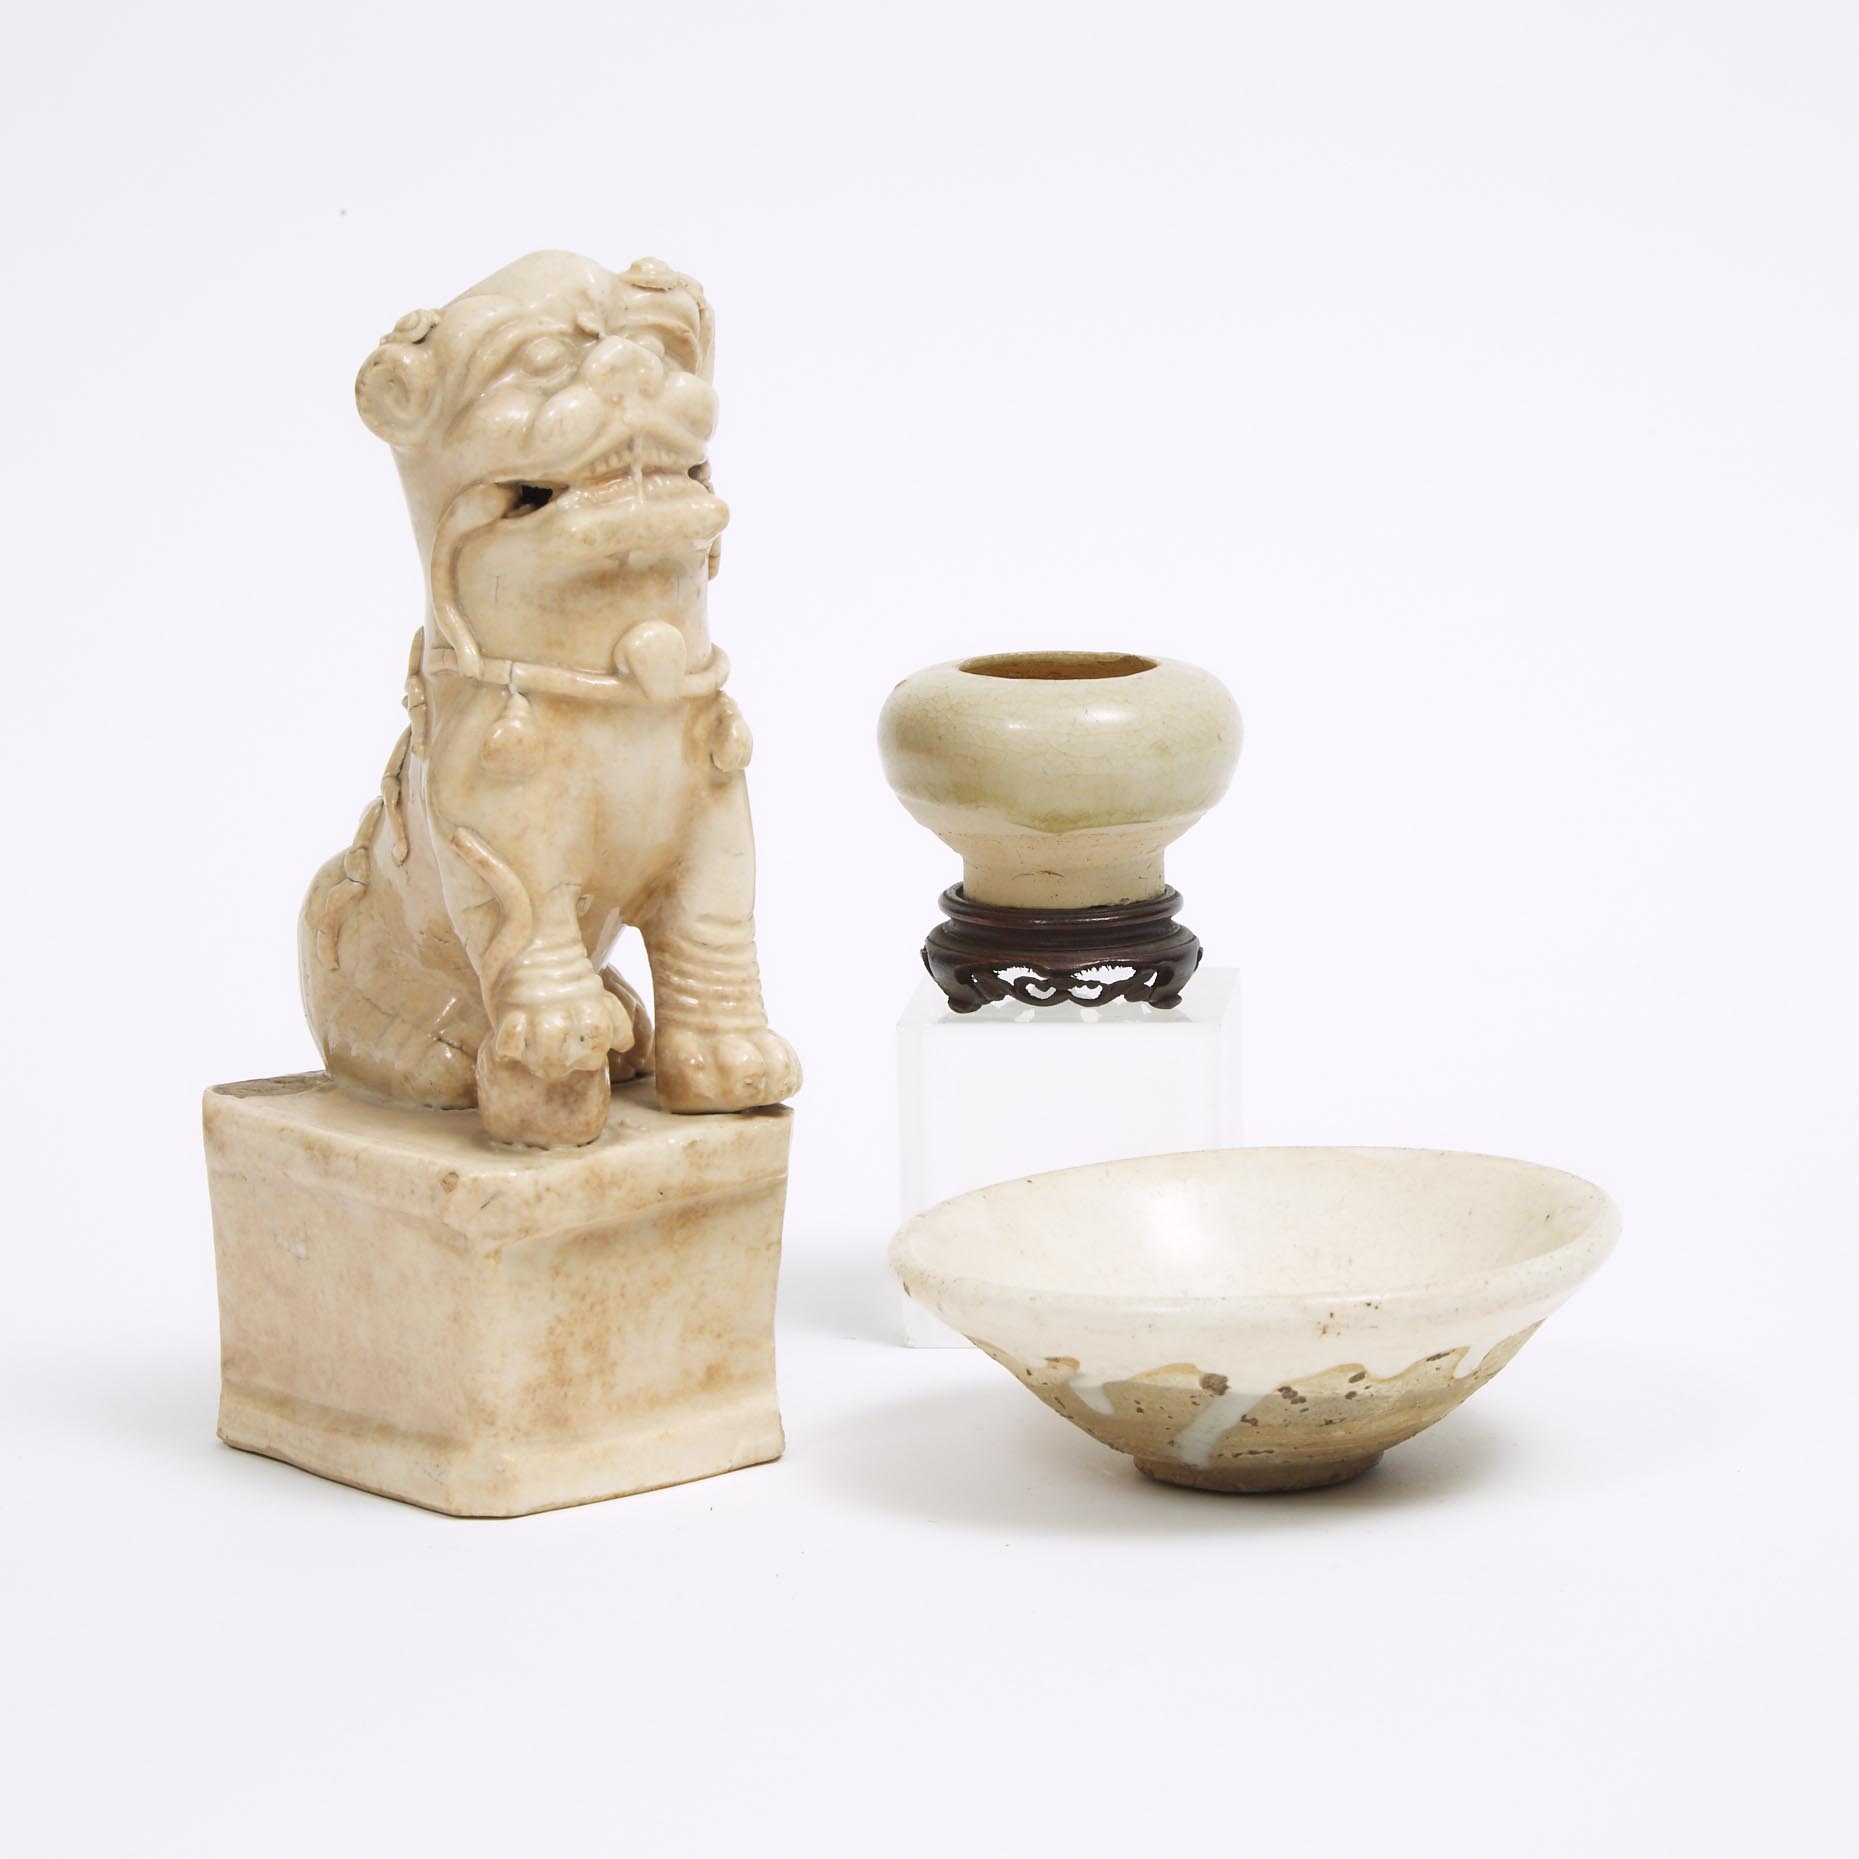 A Group of Three White-Glazed Wares, Tang Dynasty or Later